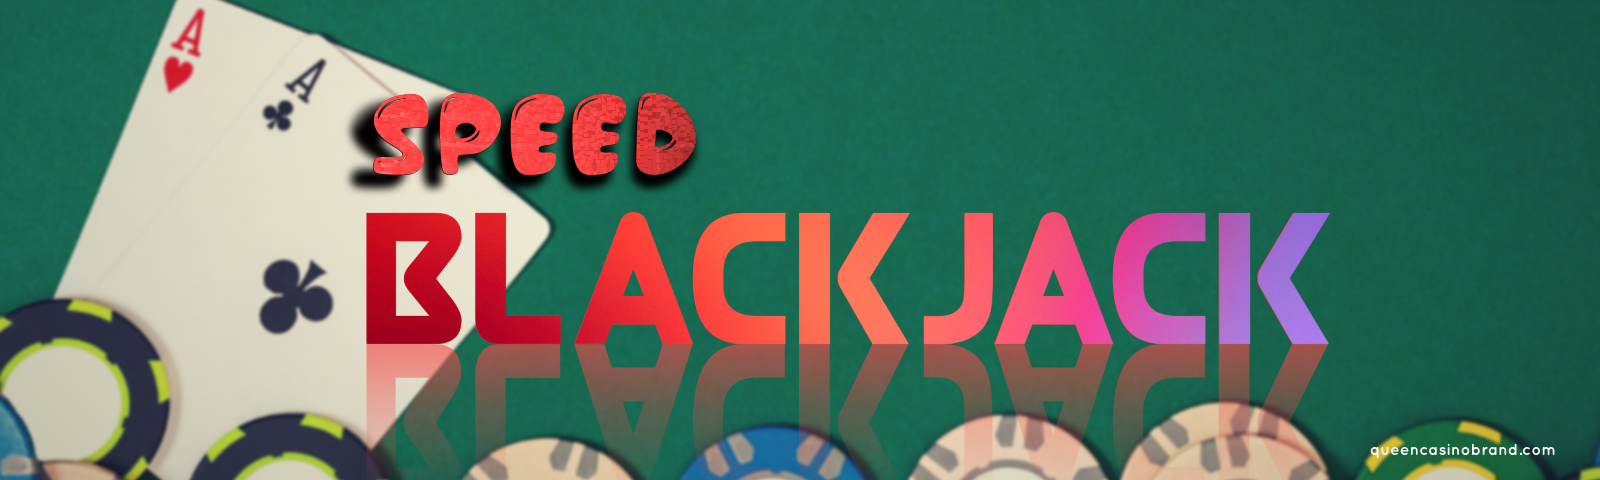 Exploring the Fast-Paced Twist of Speed Blackjack | Queen Casino Brand